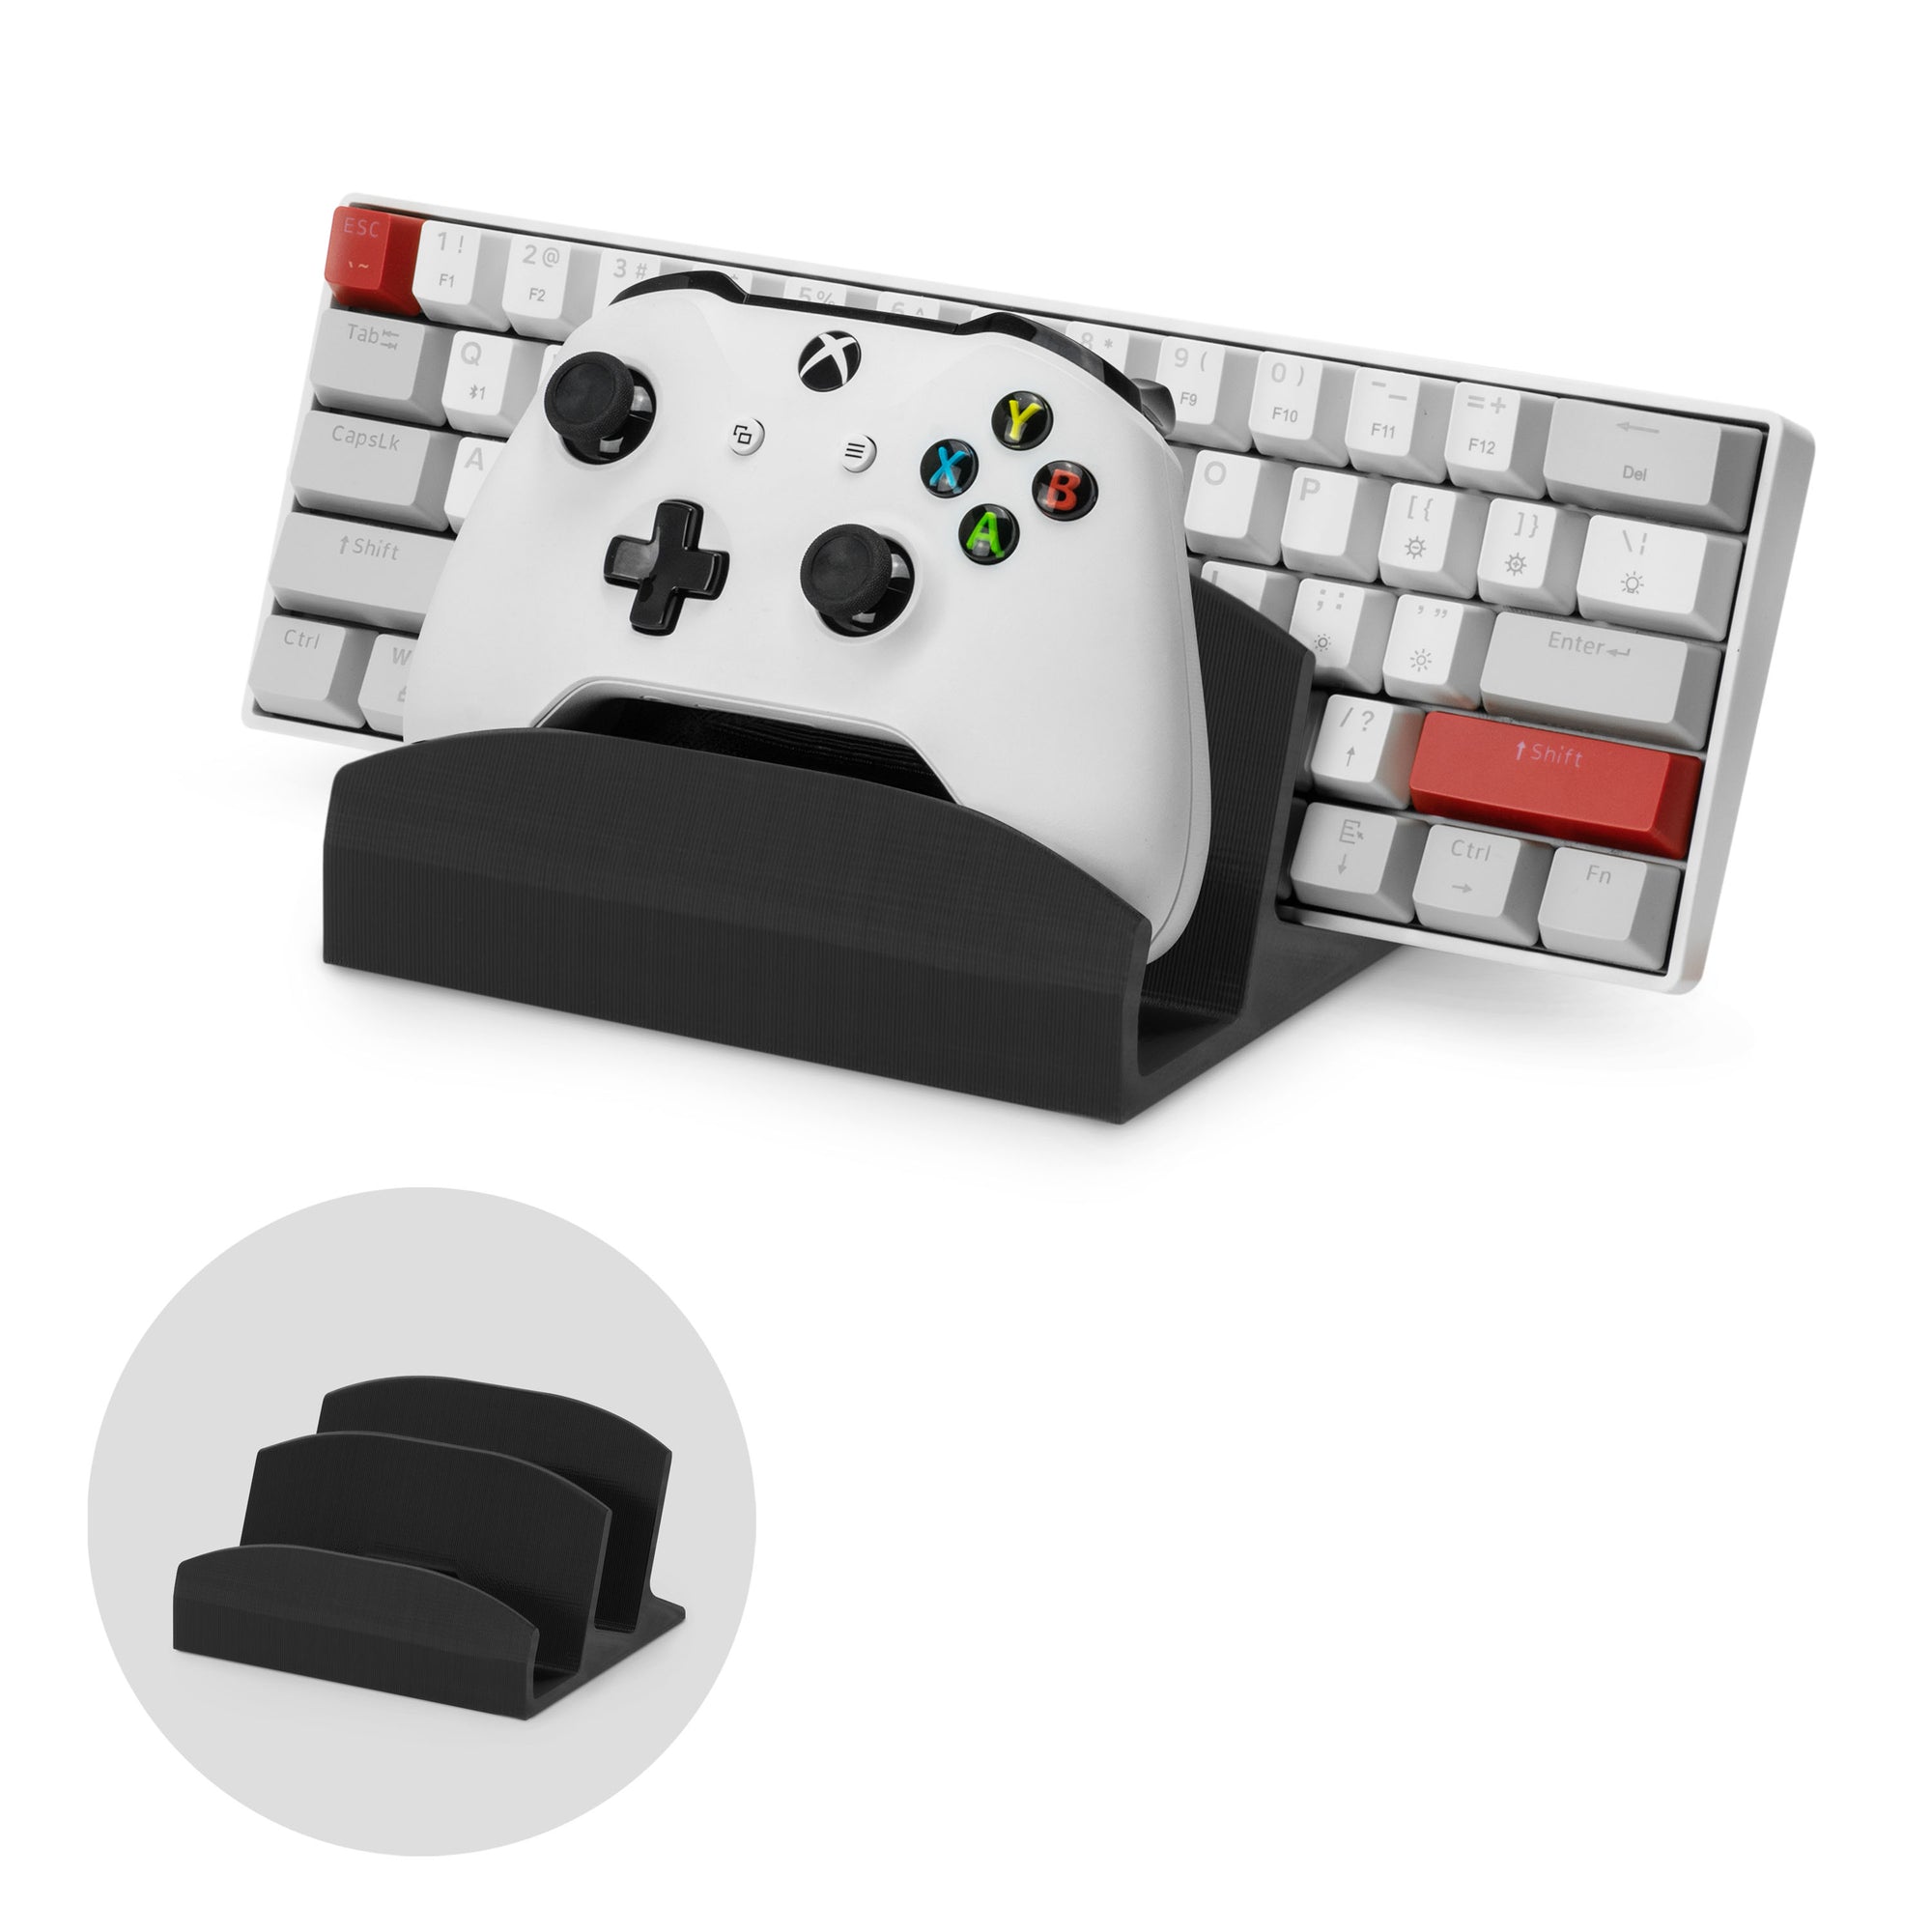 Keyboard Stand & Game Controller Holder Stand For Desktops, Reduce Clutter, Organize Your Desk, Designed for all Sizes Keyboards & All Types of Gamepads (DK04)